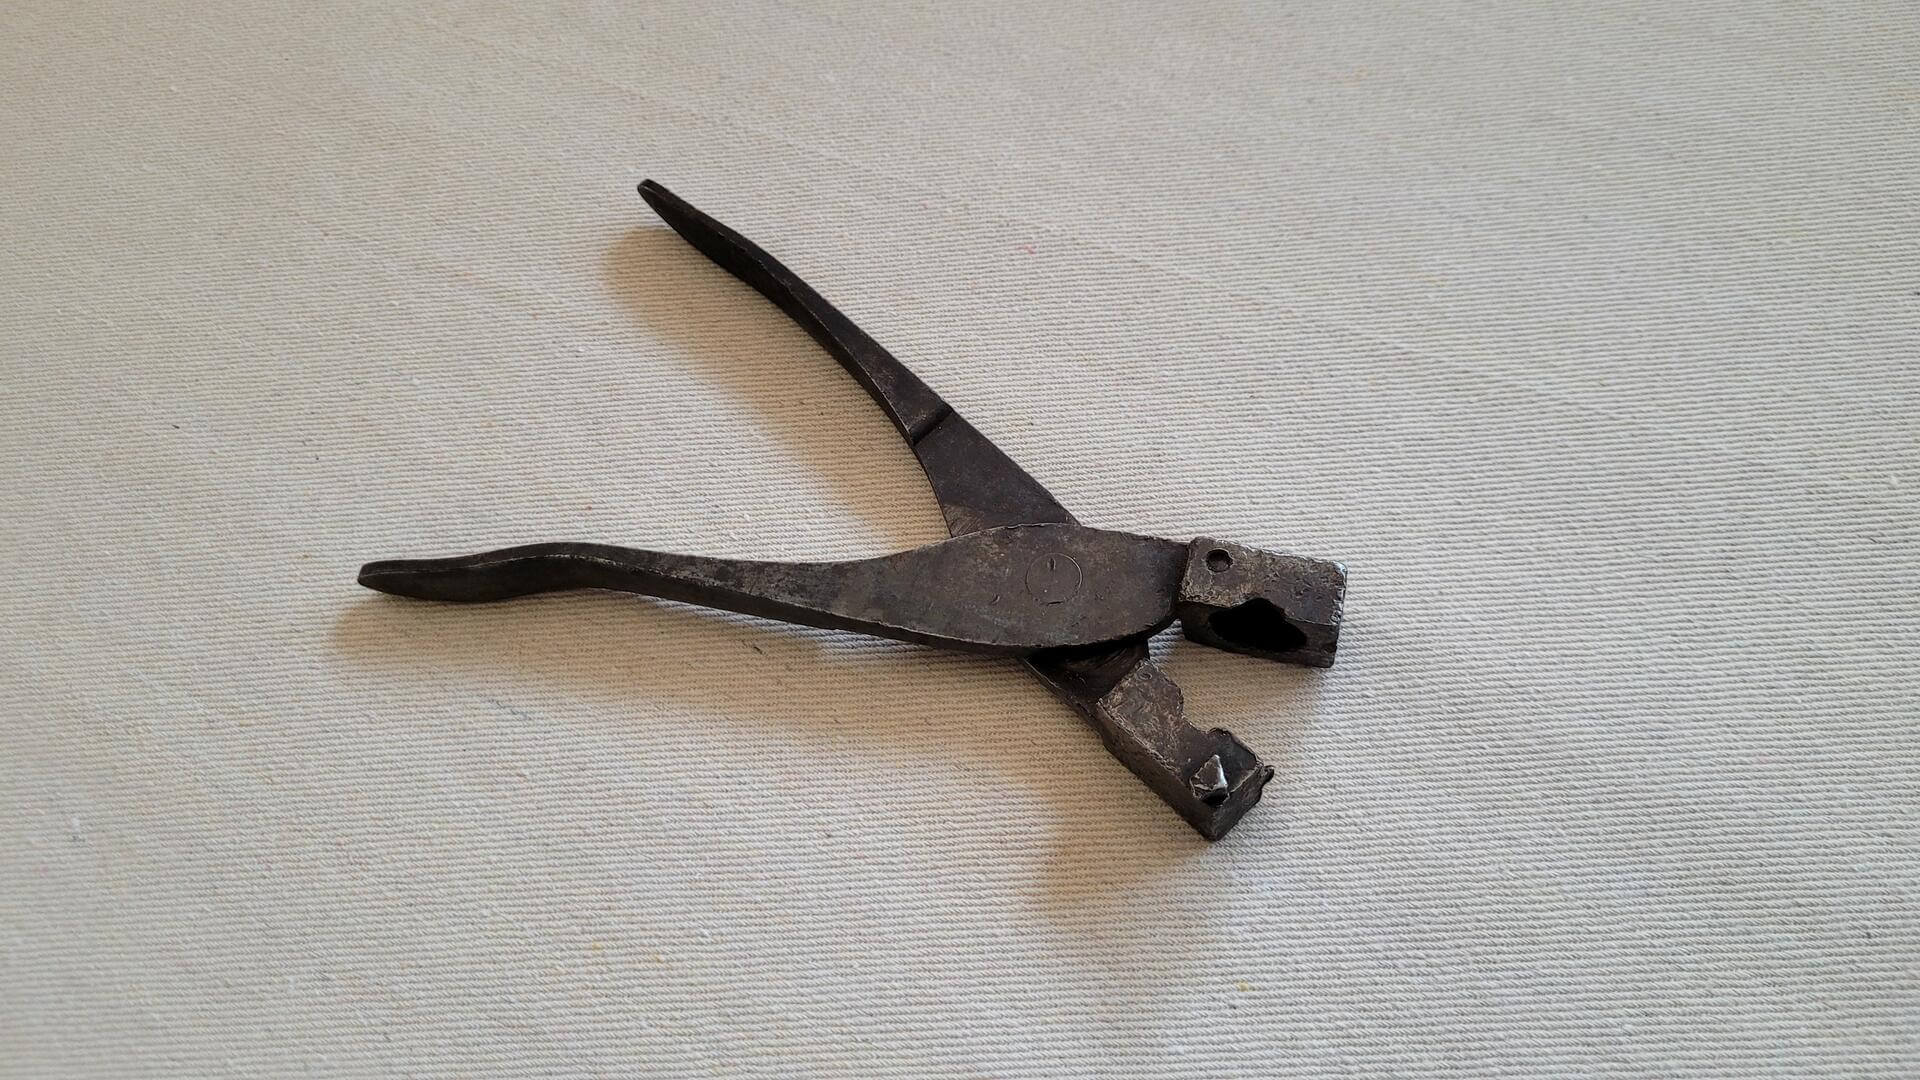 Rare vintage blacksmith lead musket ball pliers 7 inches long. 19th century primitive collectible forging hand tools and war memorabilia